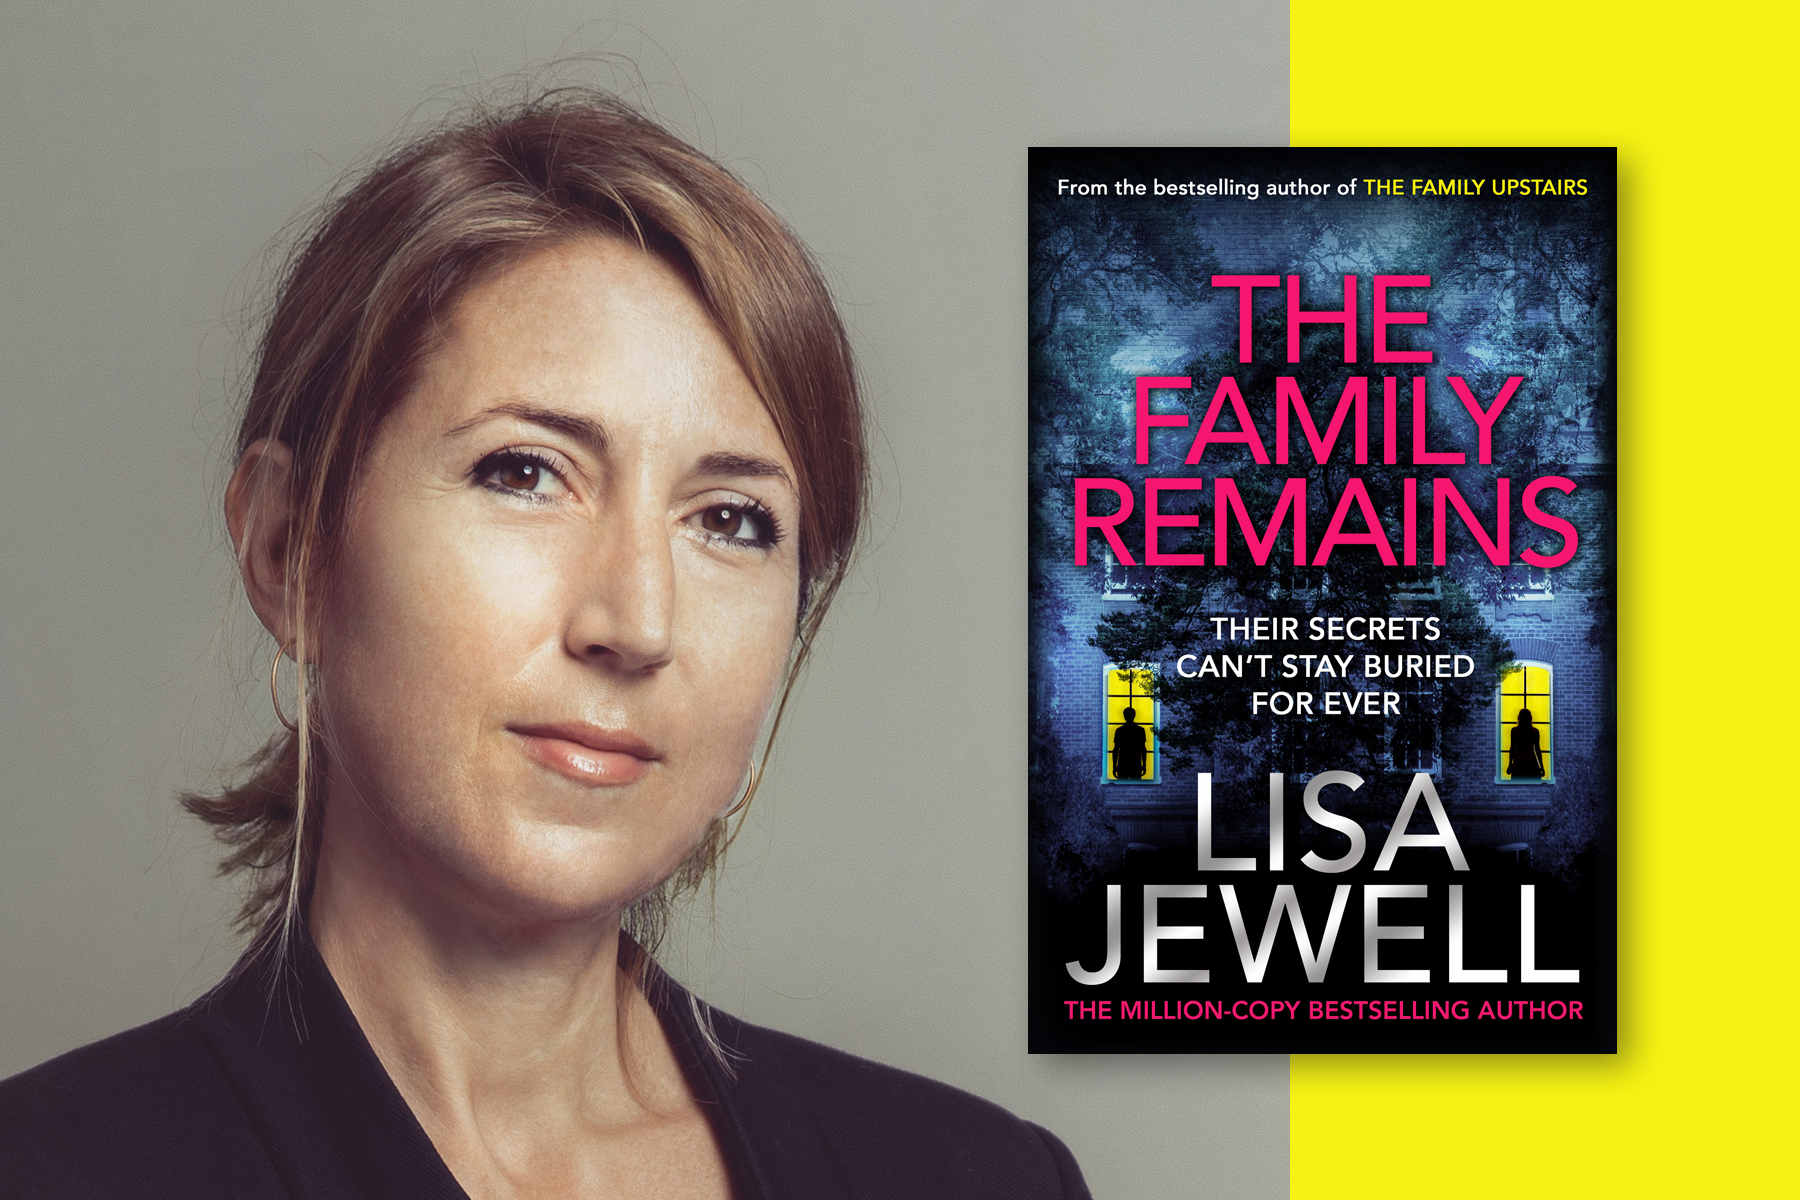 A photo of author Lisa Jewell, with the cover of her book The Family Remains to her right against a yellow background.